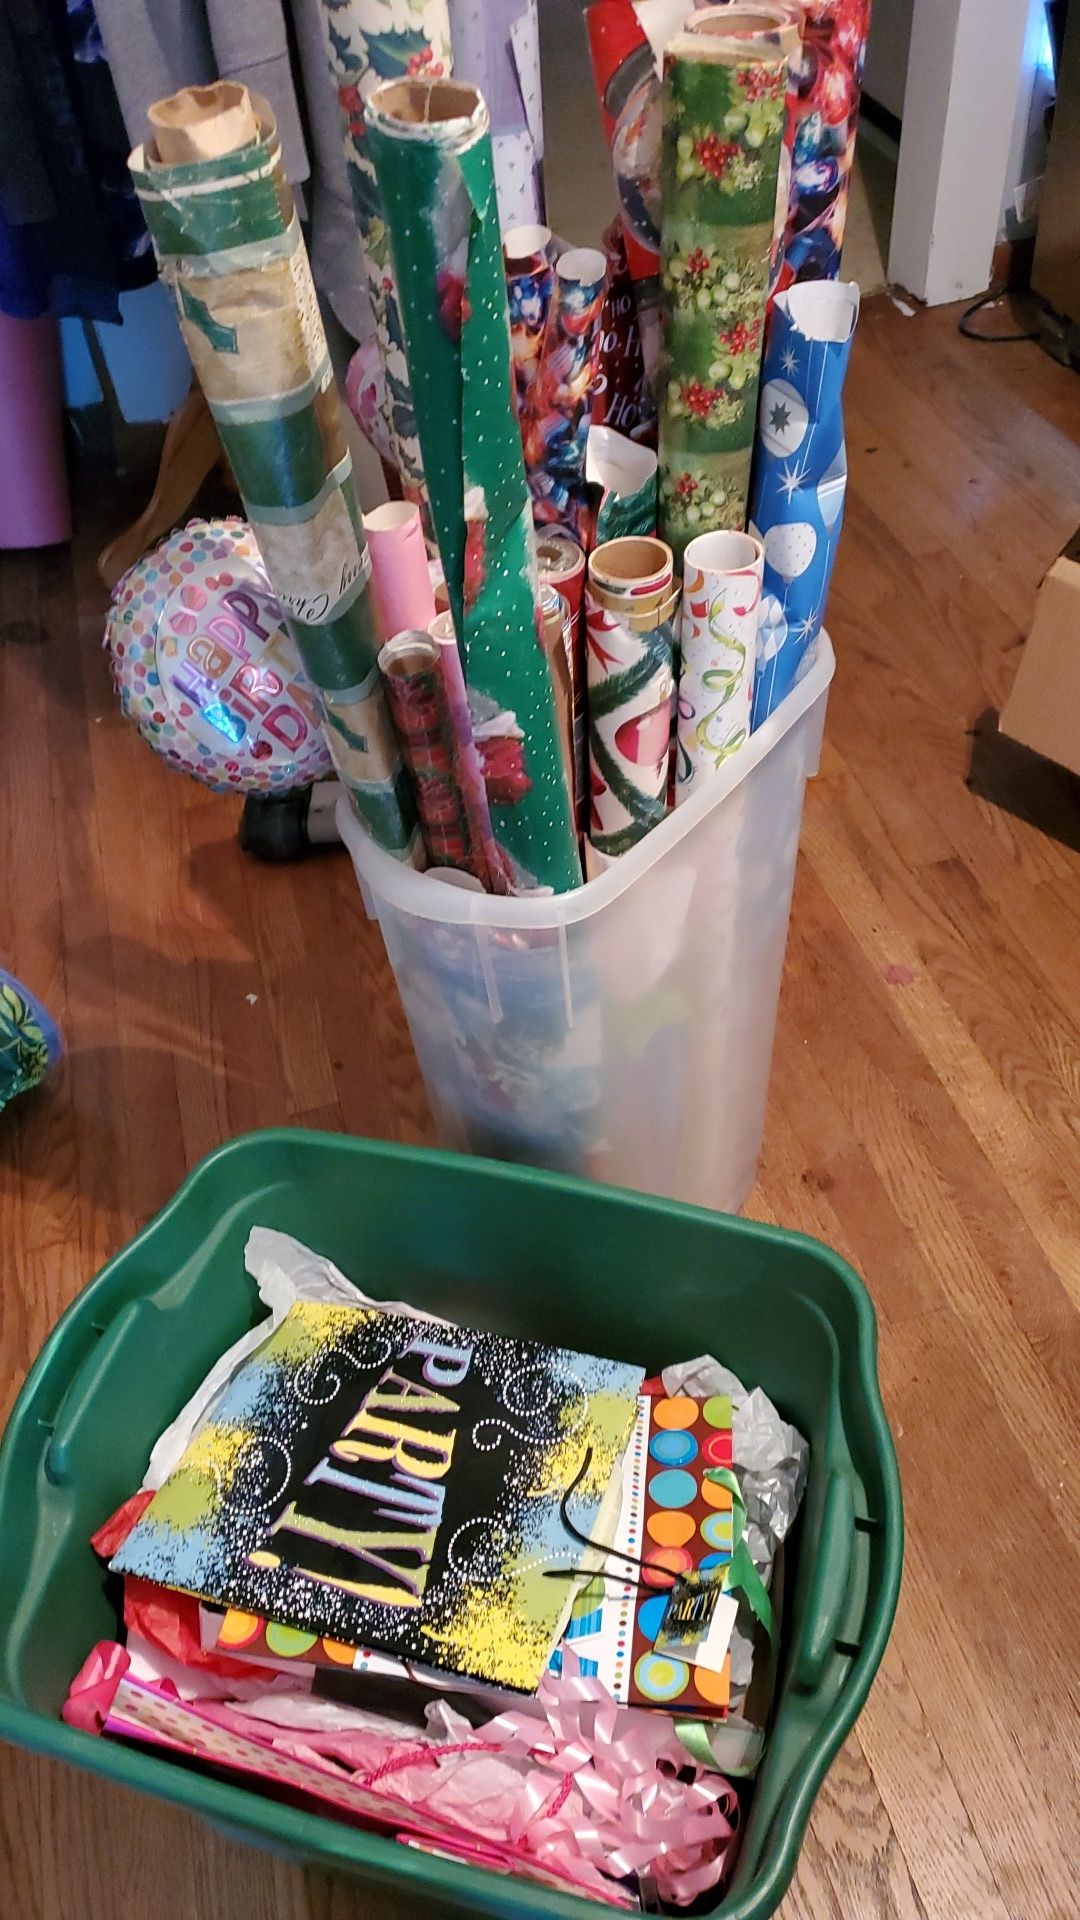 FREE wrapping paper, gift bags, gift boxes